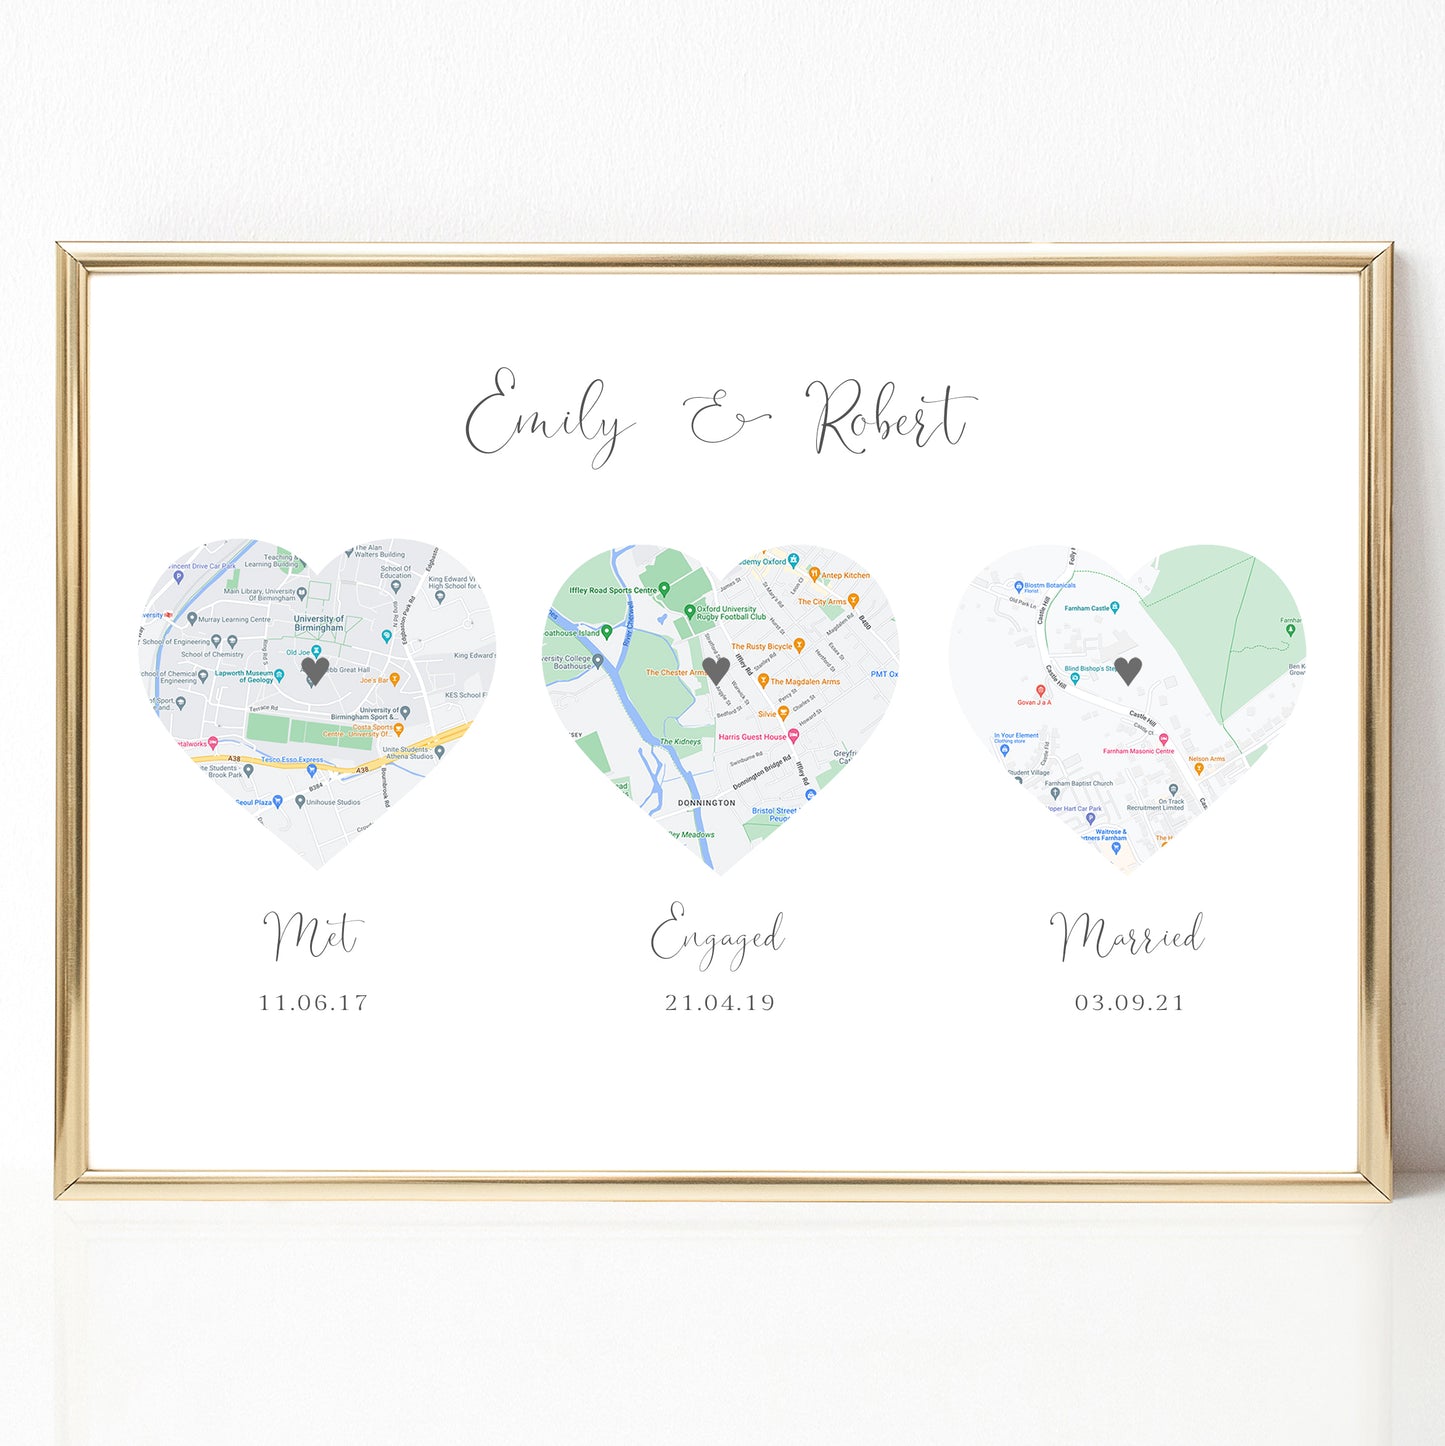 custom made triple city map print met engaged married locations matte white paperstock unframed